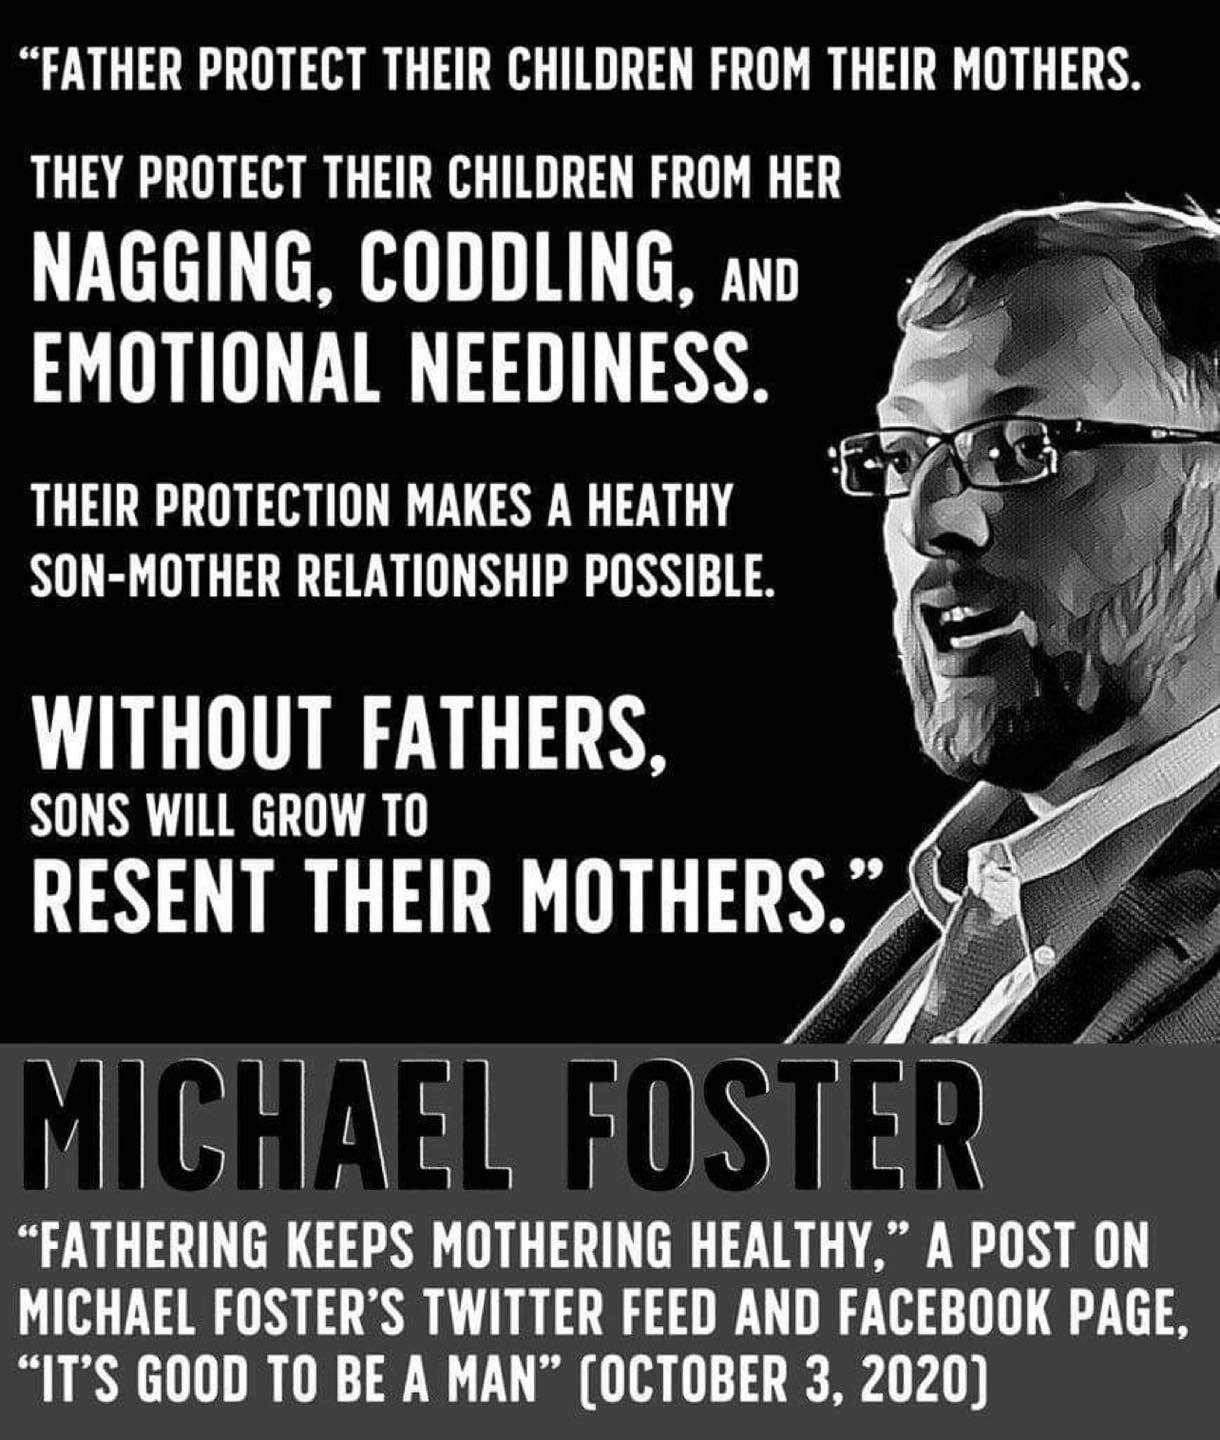 Foster fathers protect children from mothers.jpg